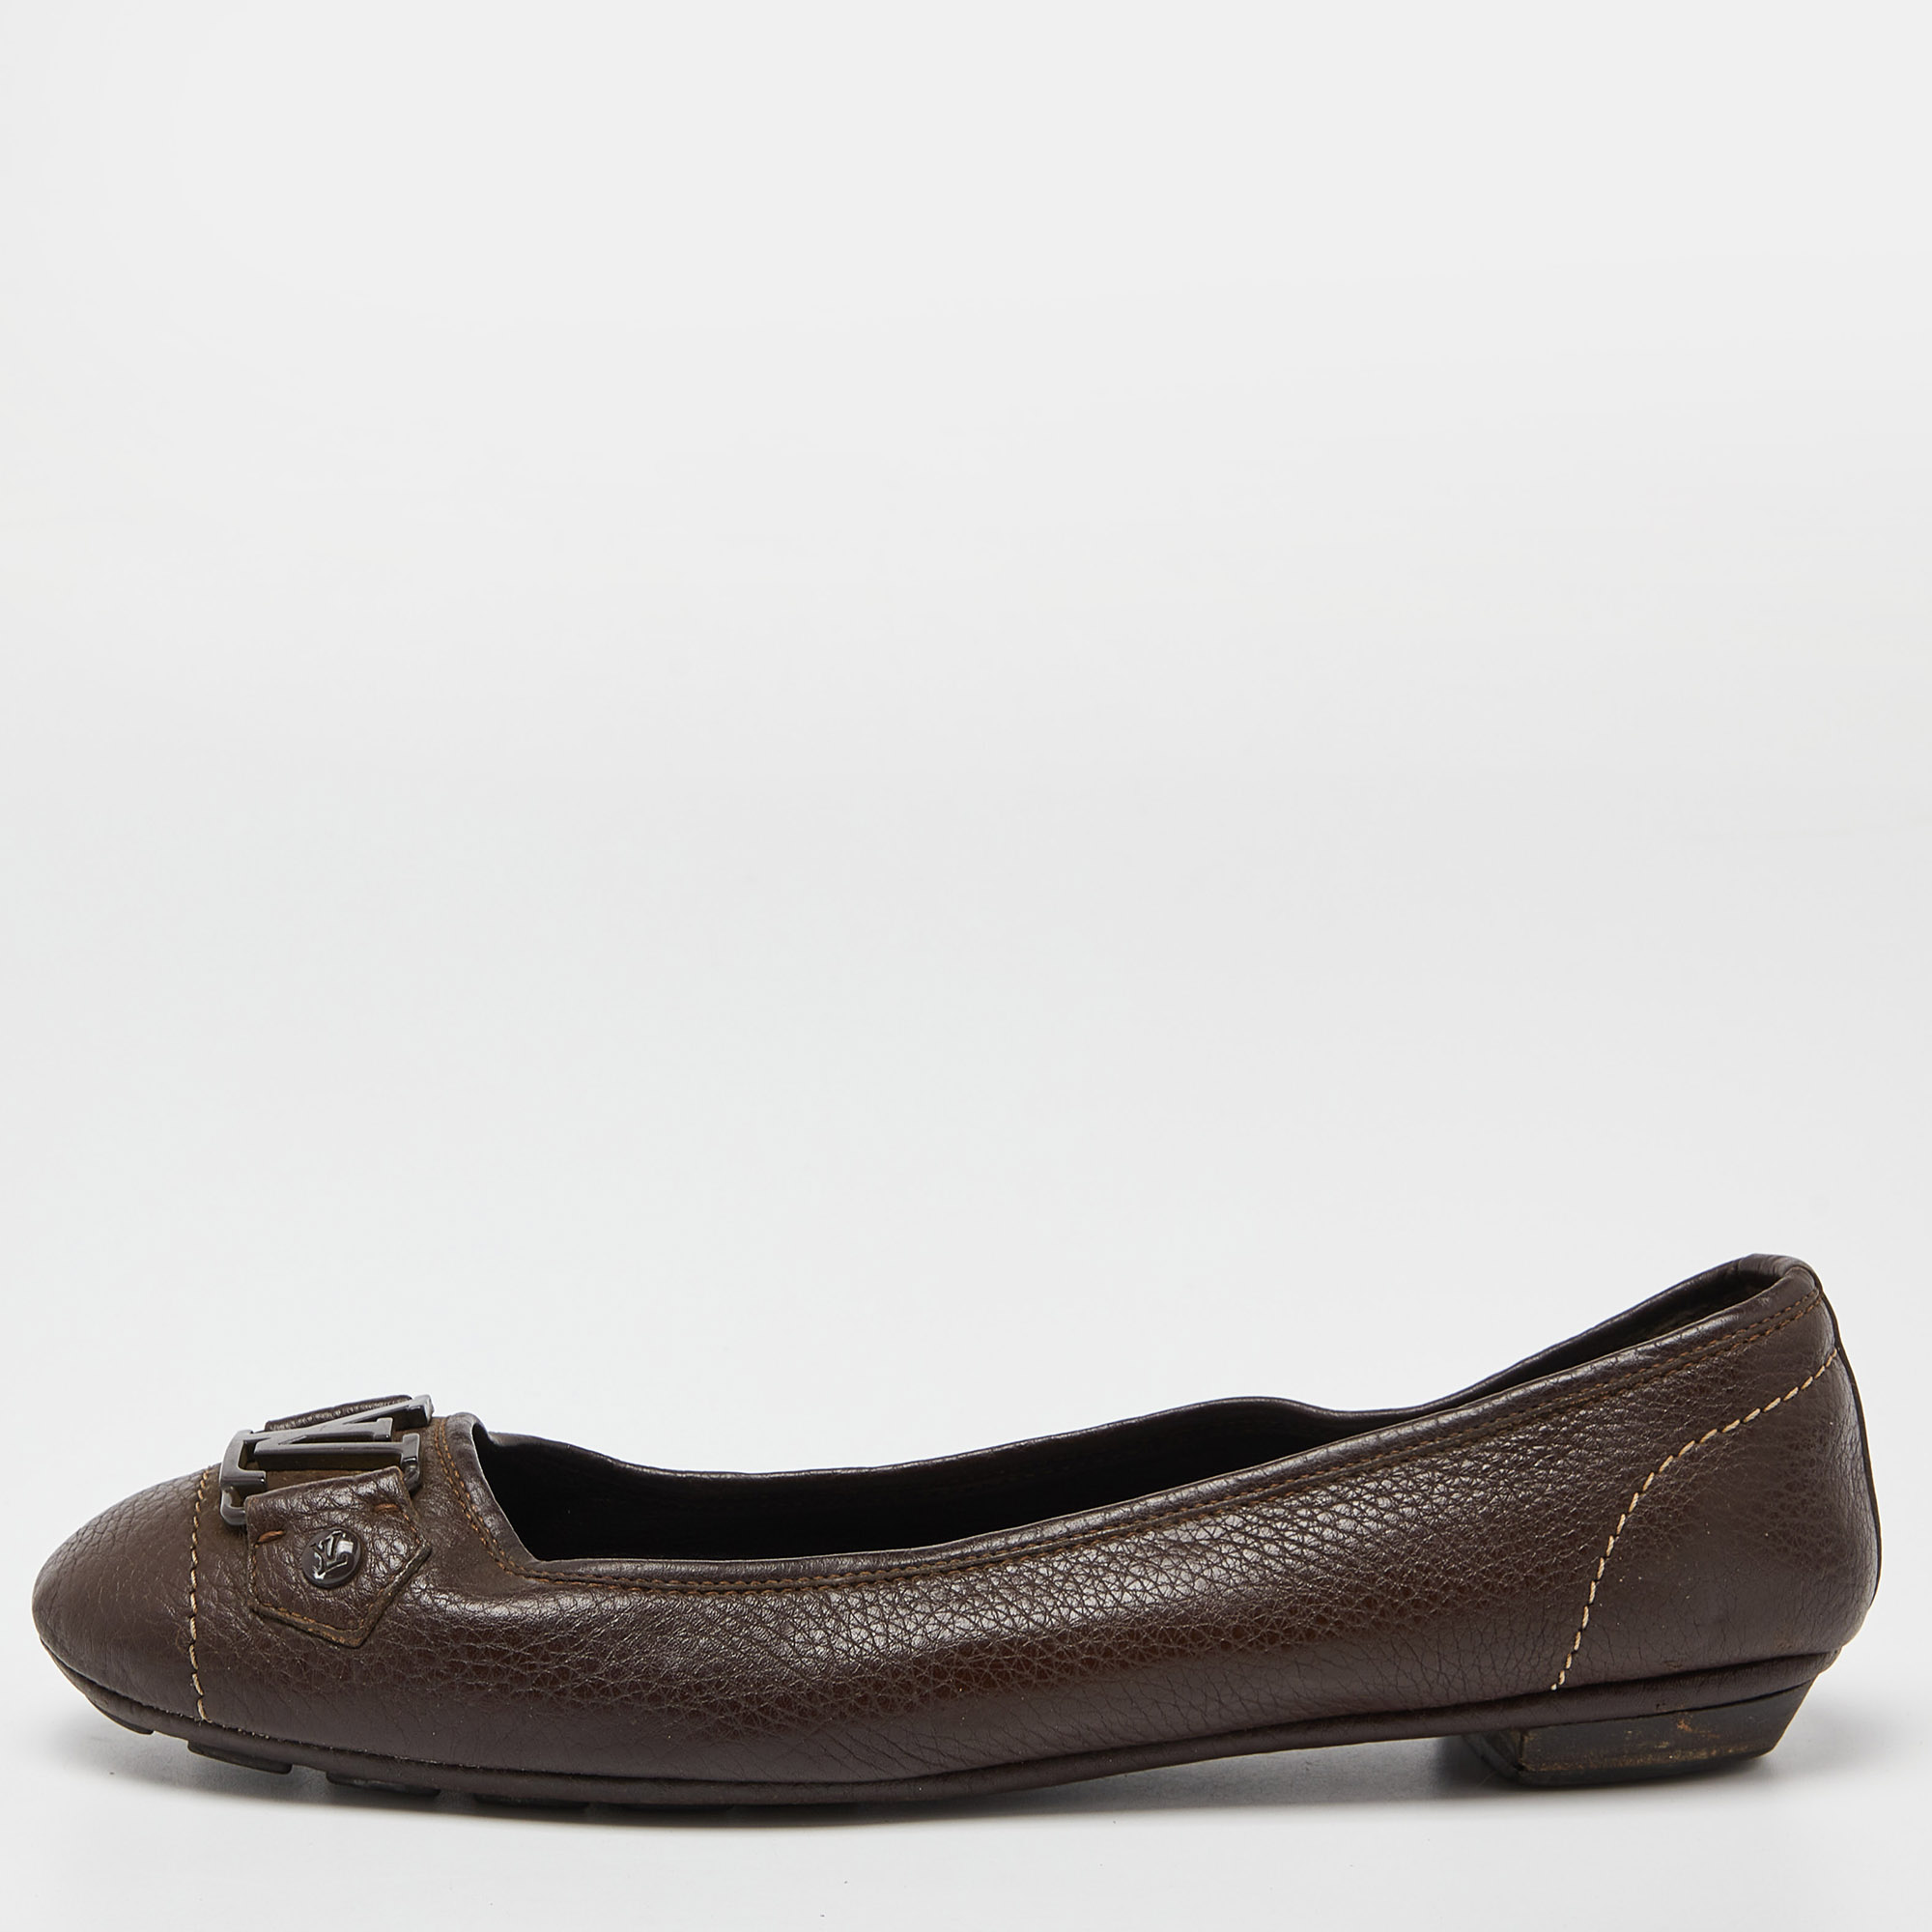 Pre-owned Louis Vuitton Brown Leather Oxford Ballet Flats Size 40